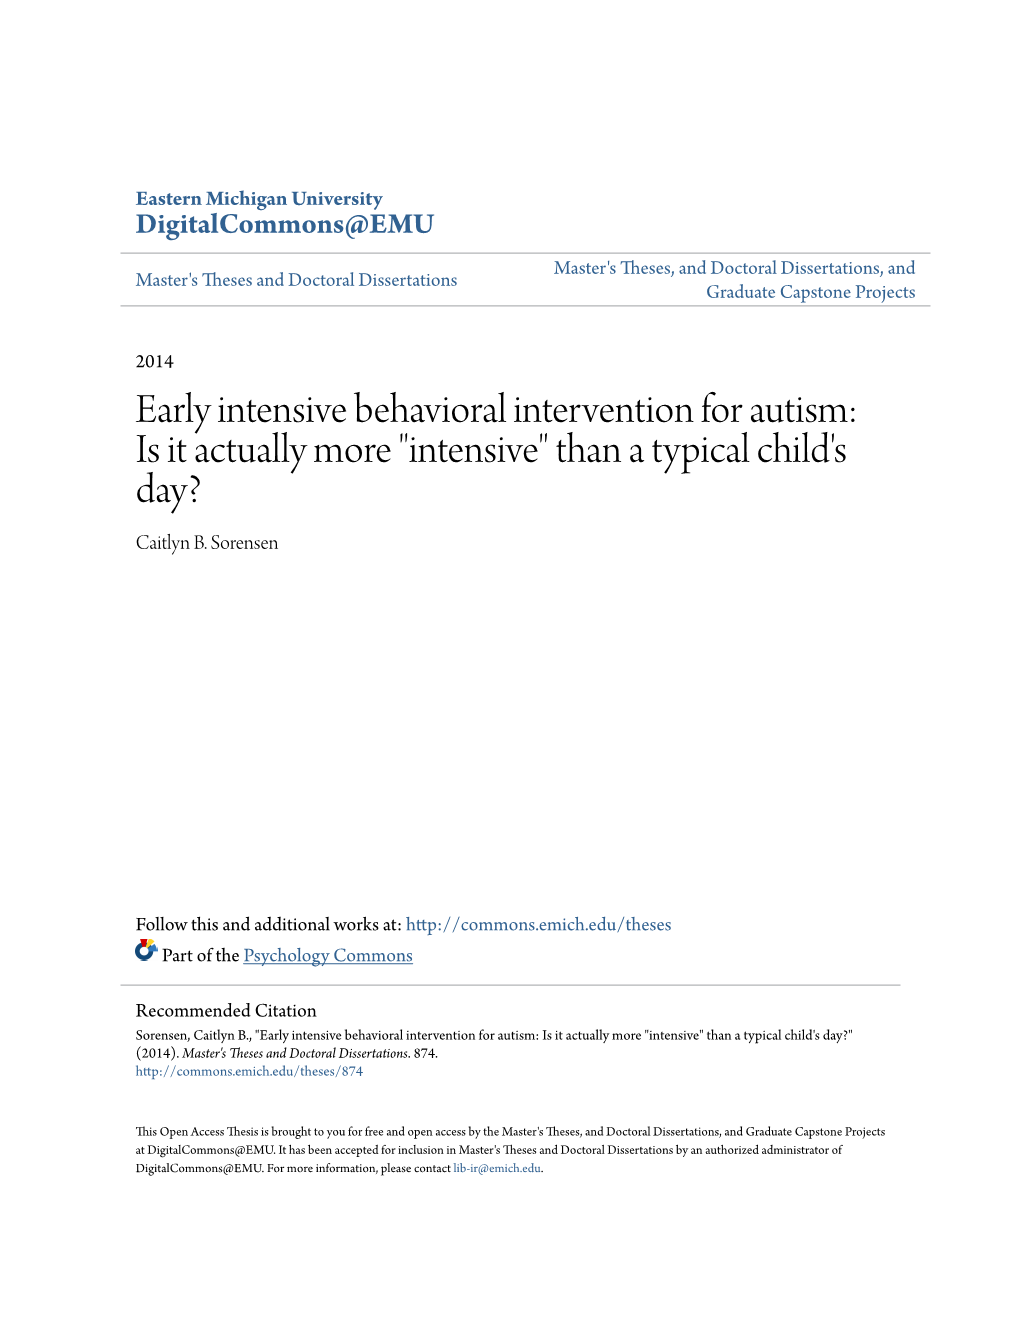 Early Intensive Behavioral Intervention for Autism: Is It Actually More "Intensive" Than a Typical Child's Day? Caitlyn B